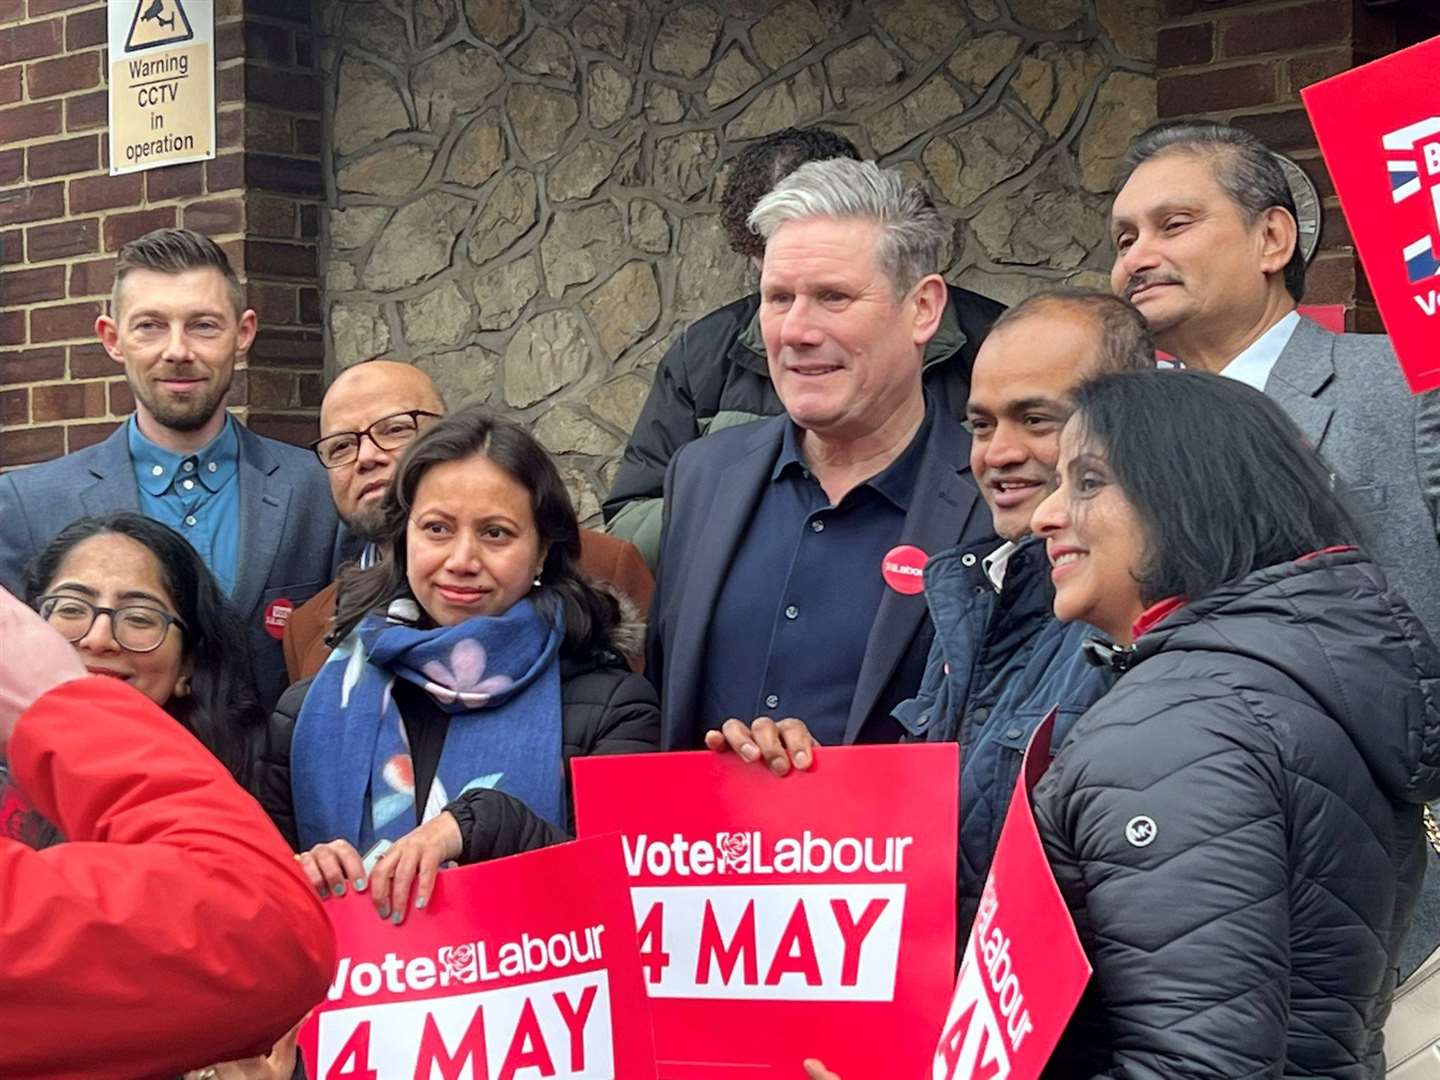 Sir Keir Starmer on a visit to support Labour candidates in Medway